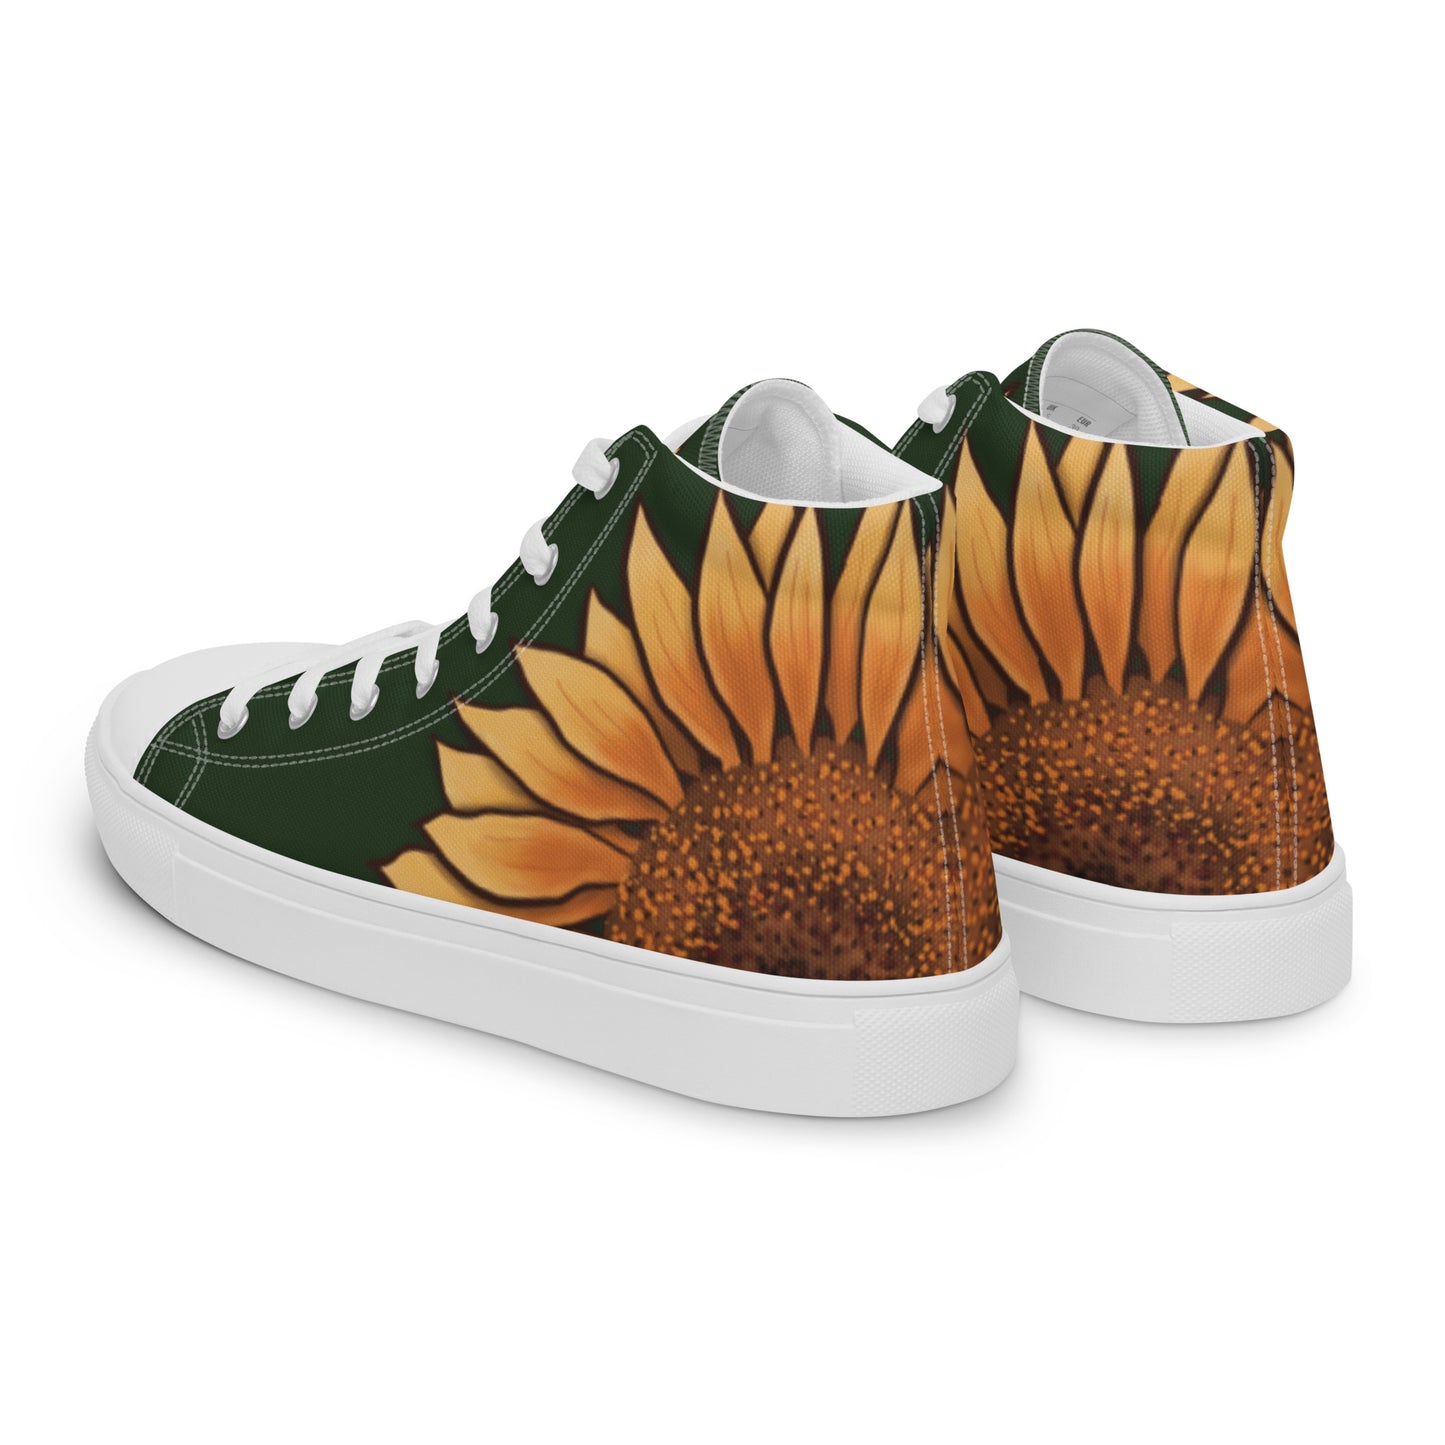 Left back view: a pair of high top shoes with a large sunflower on the heel and a forest green background.